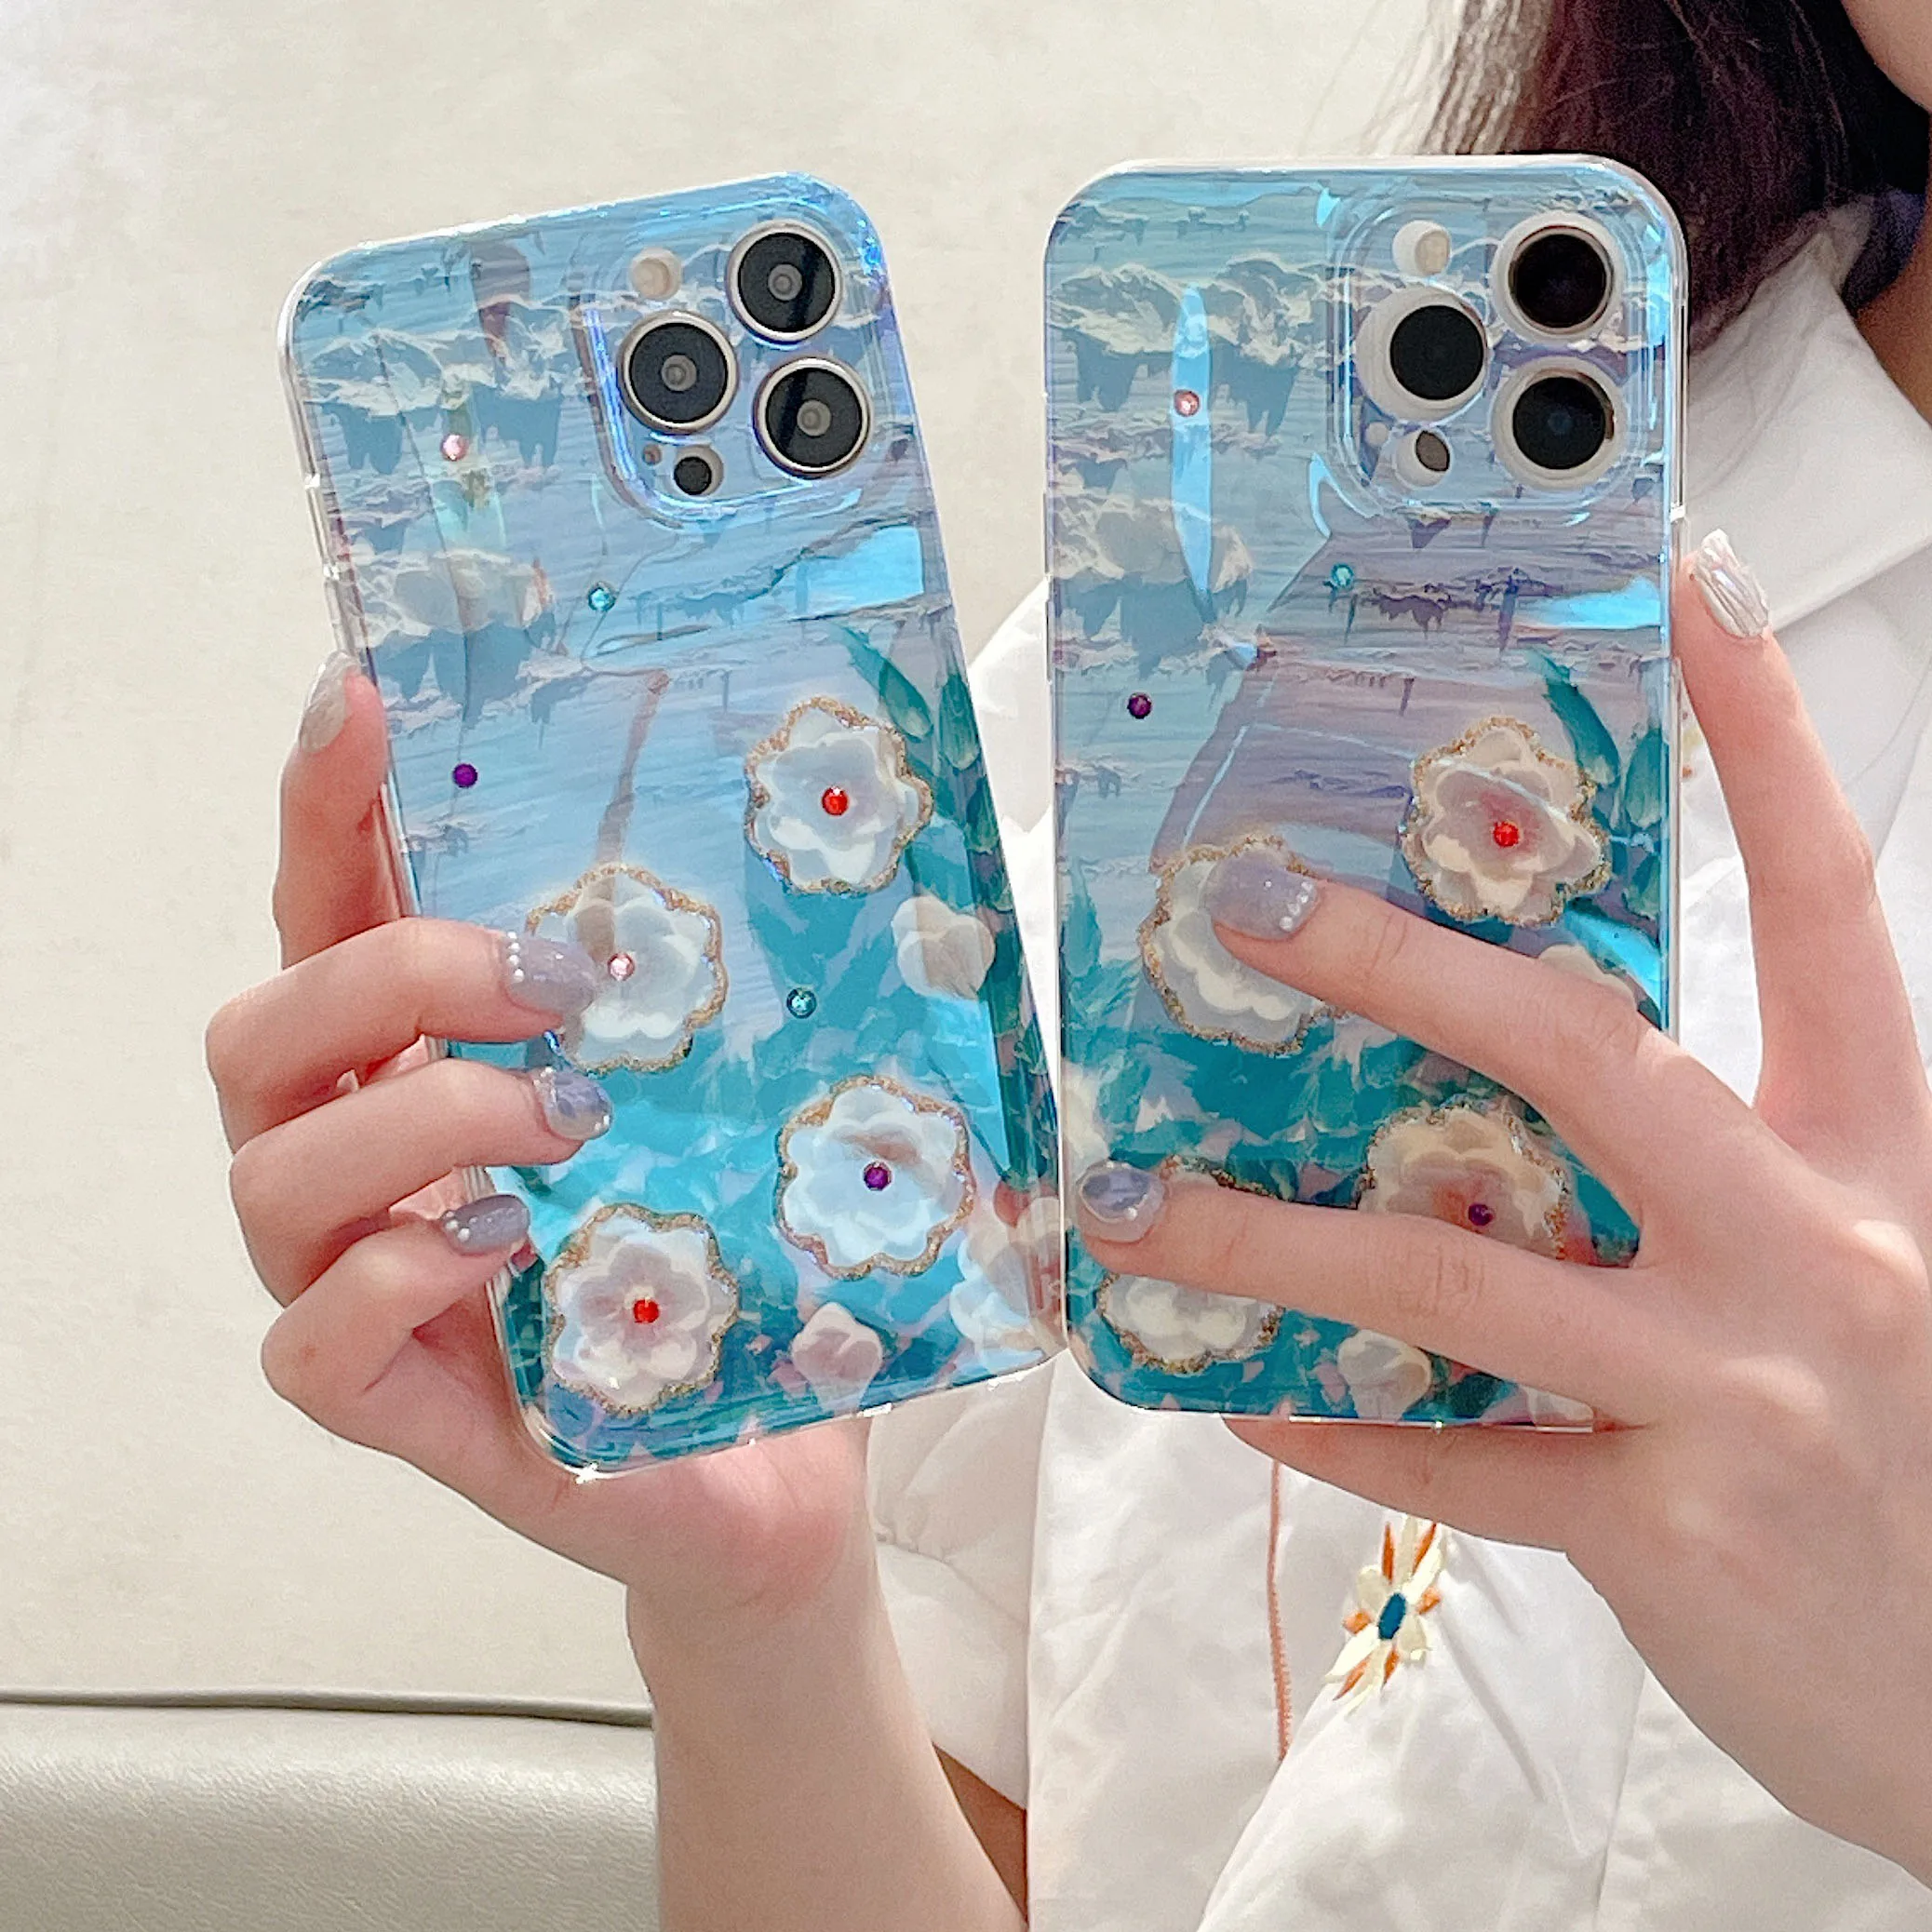 

Blu-ray Flower Cute Case For Huawei P50 Pro Luxury Shockproof Soft Silicone Phone Cover for Huawei P40 Pro Plus P40 Lite P30 Pro